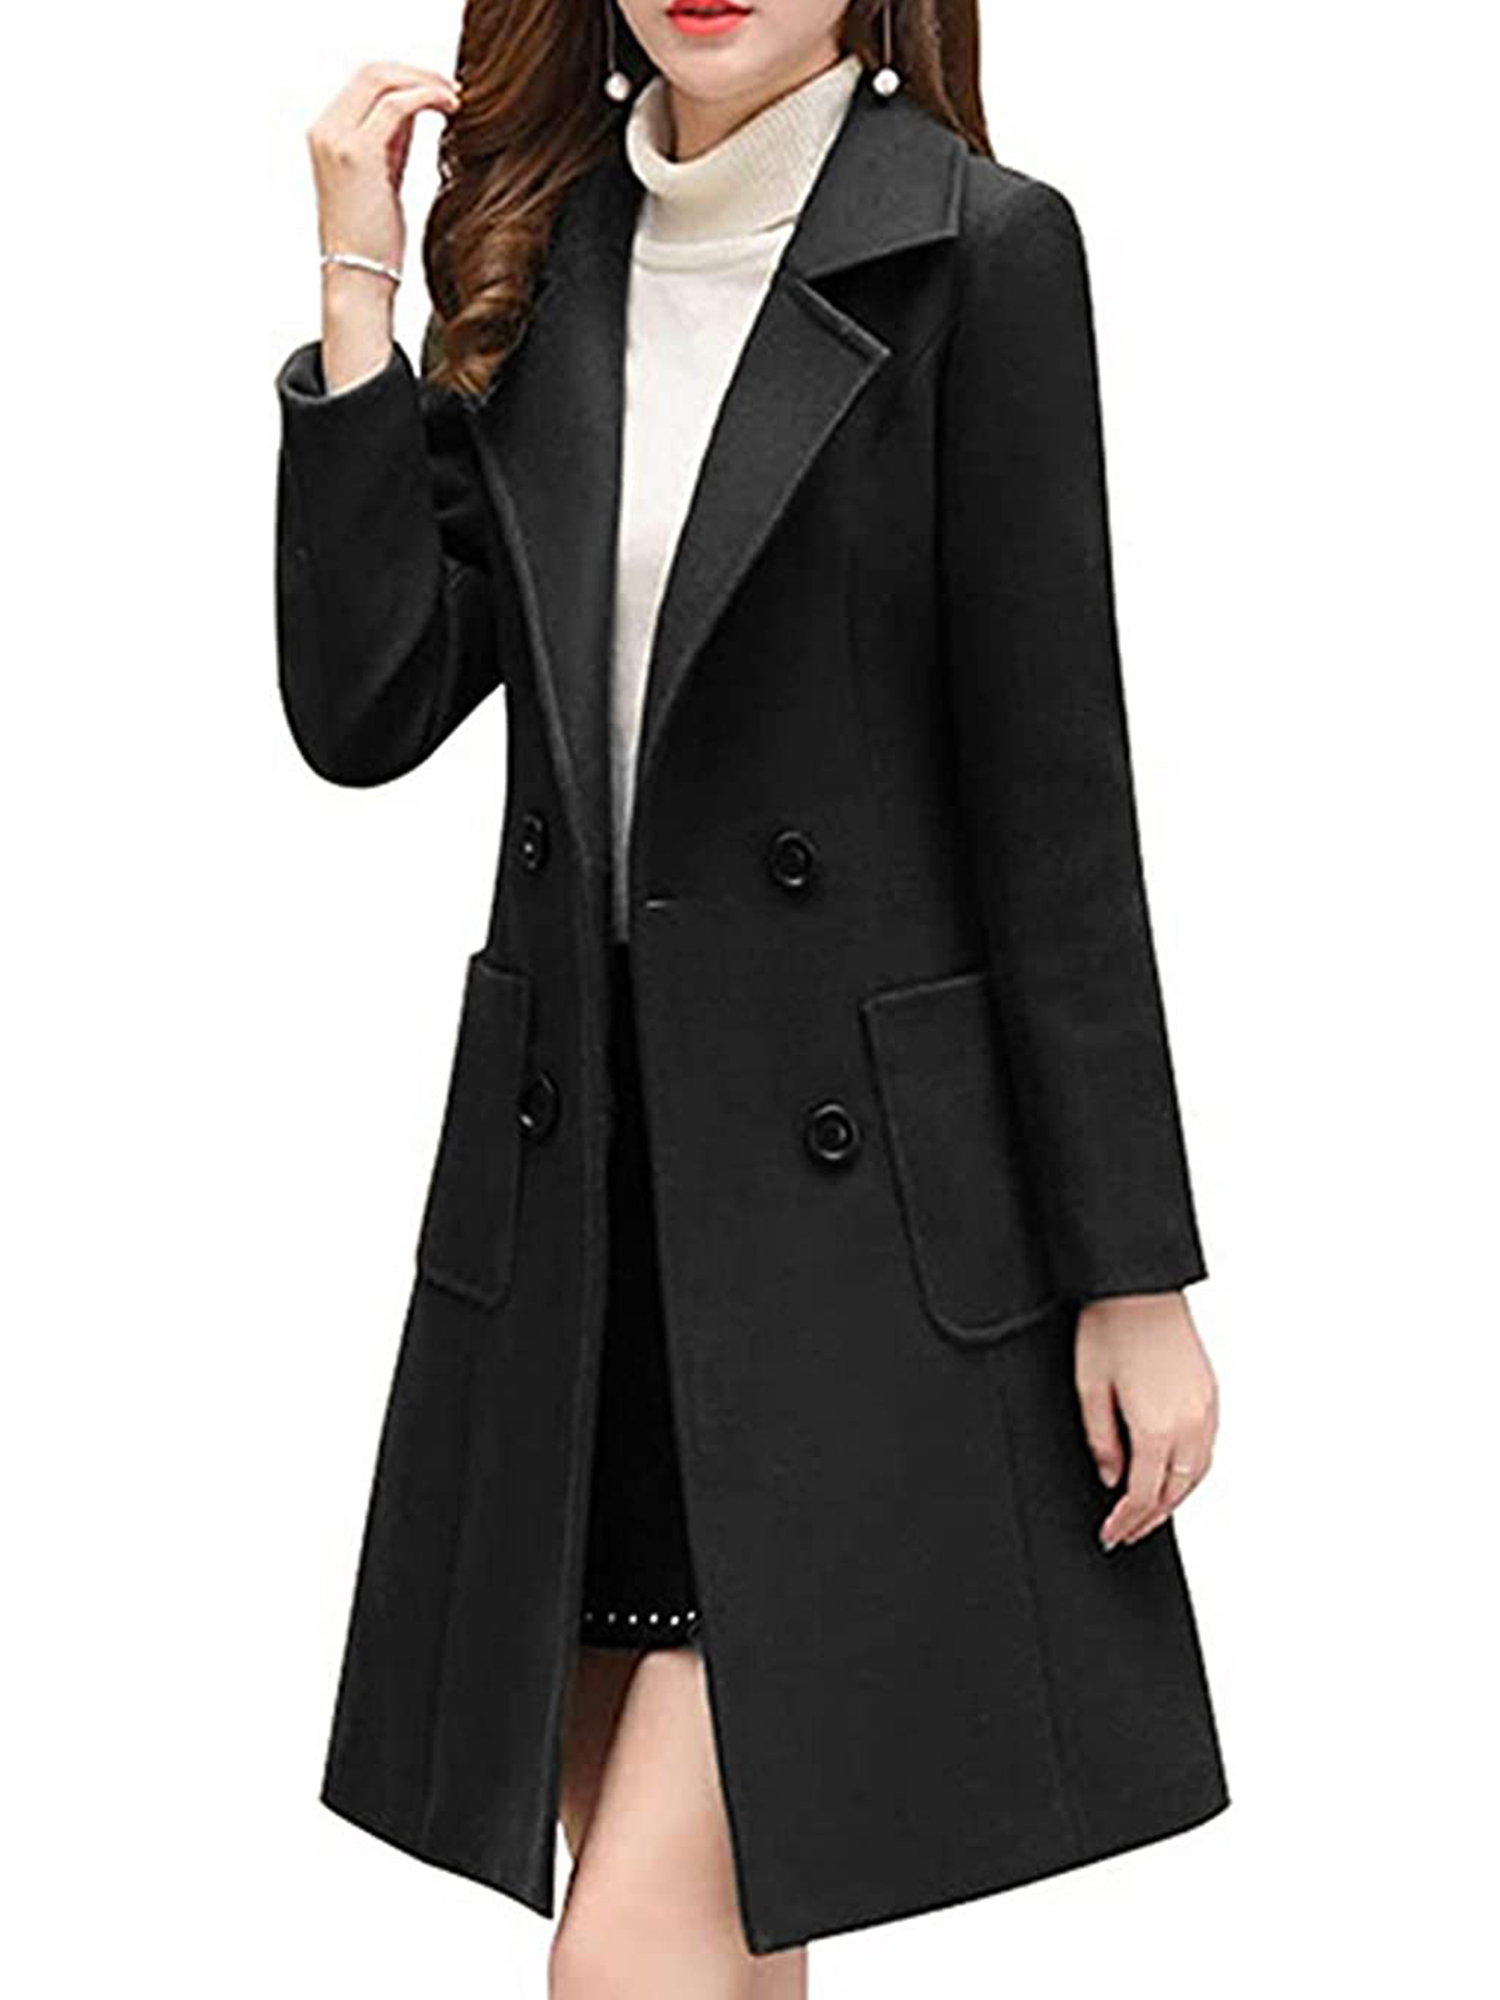 Grianlook Women Jacket Double Breasted Trench Coat Lapel Neck Outwear Ladies  Casual Overcoats Mid Length Long Sleeve Pea Coats Black L